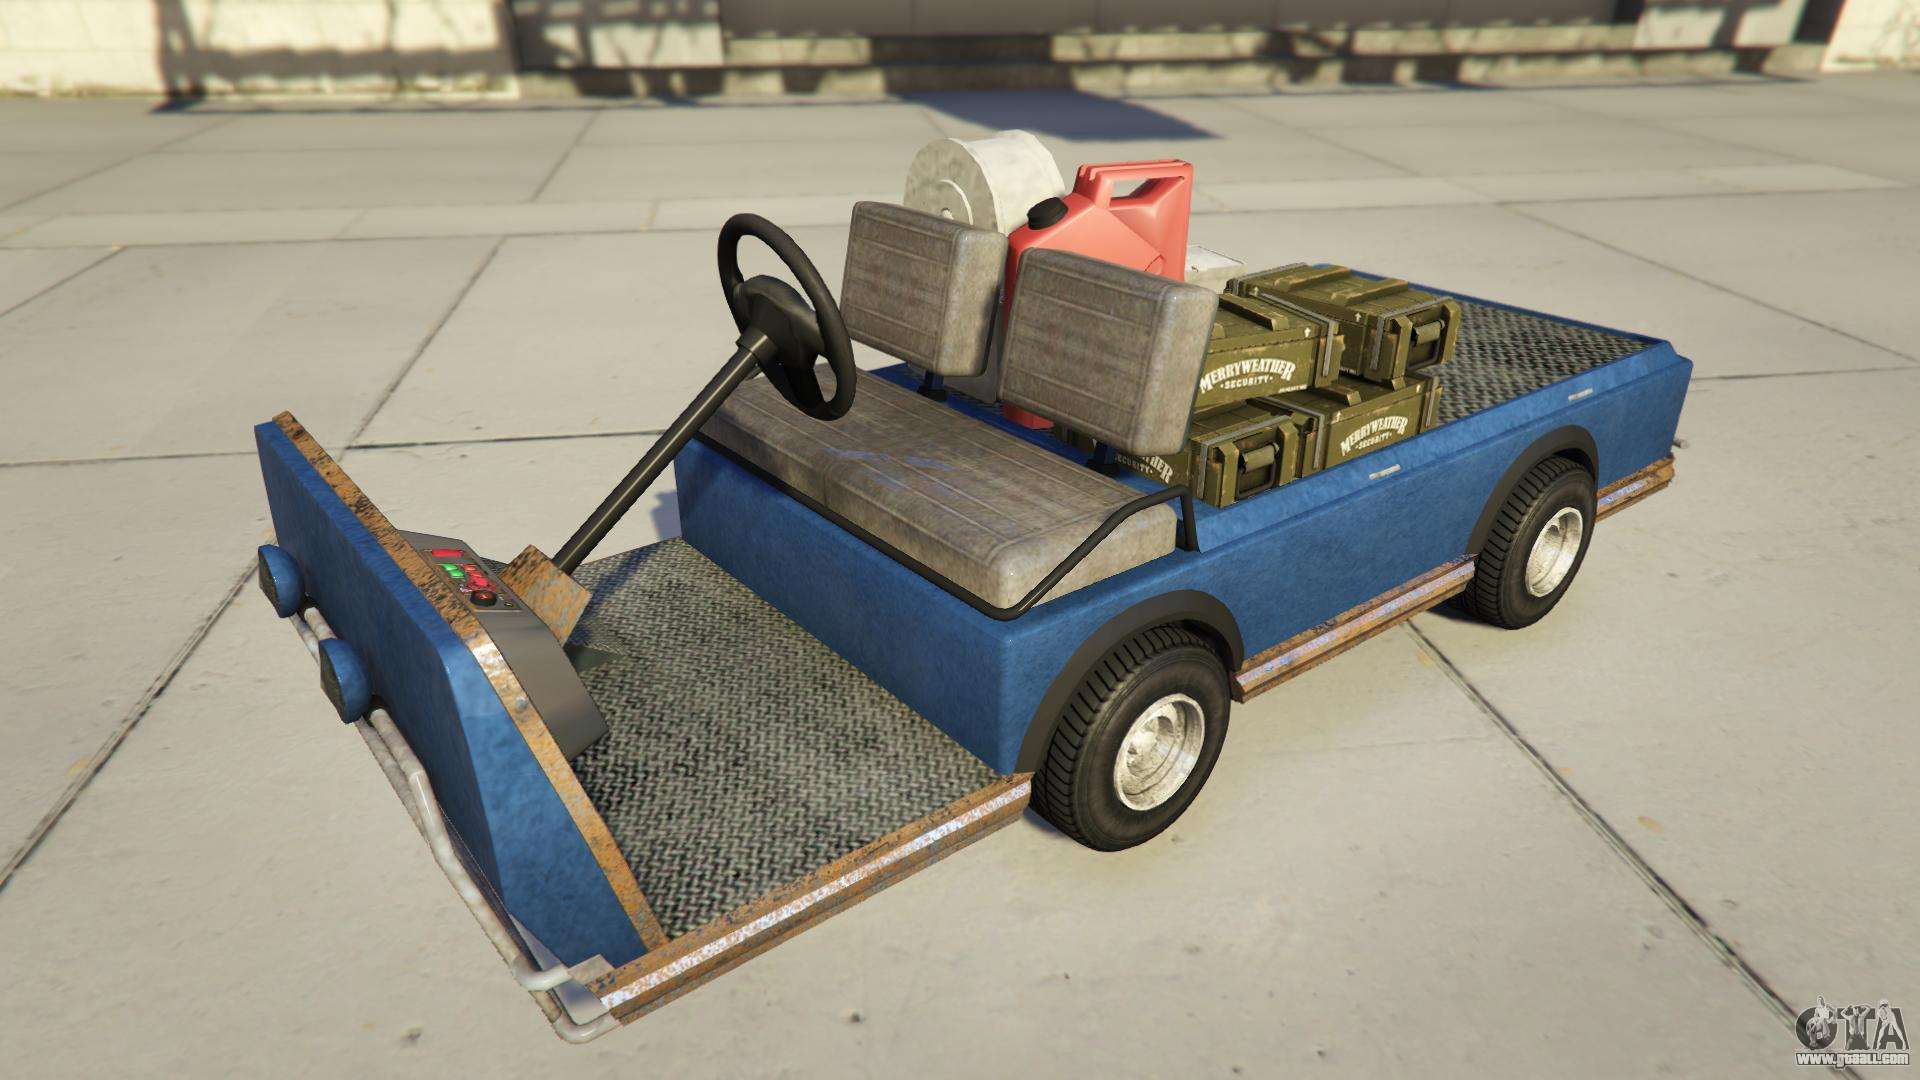 Nagasaky Bunker Caddy from GTA Online